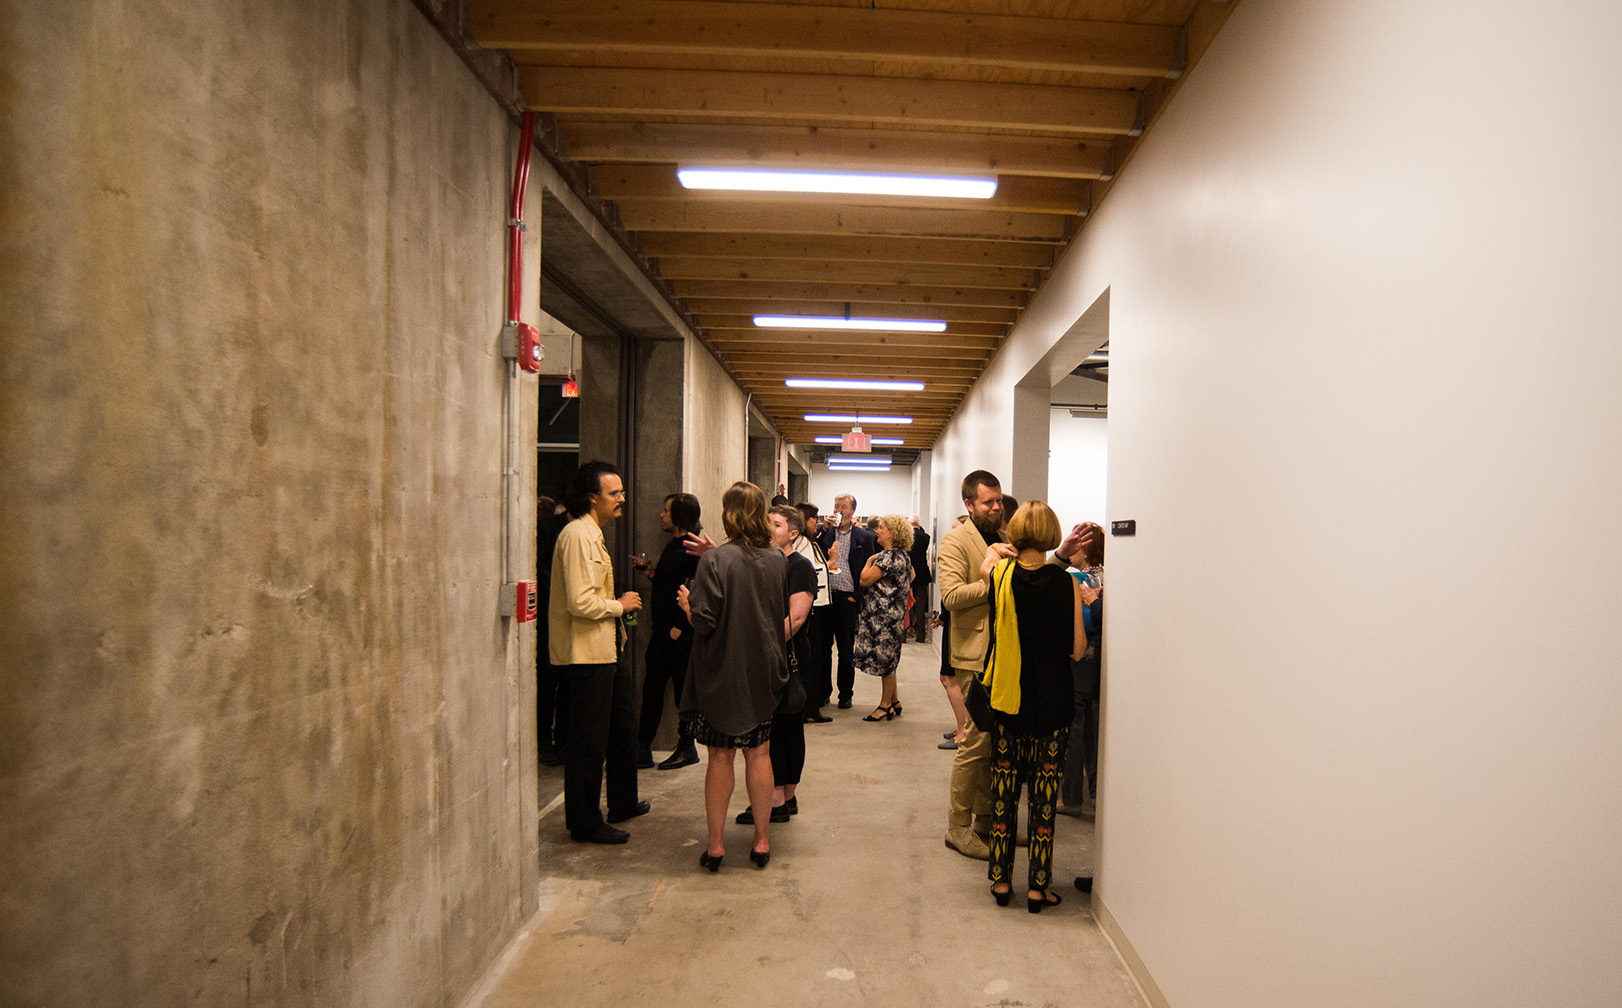 People talk in the hallway during an event